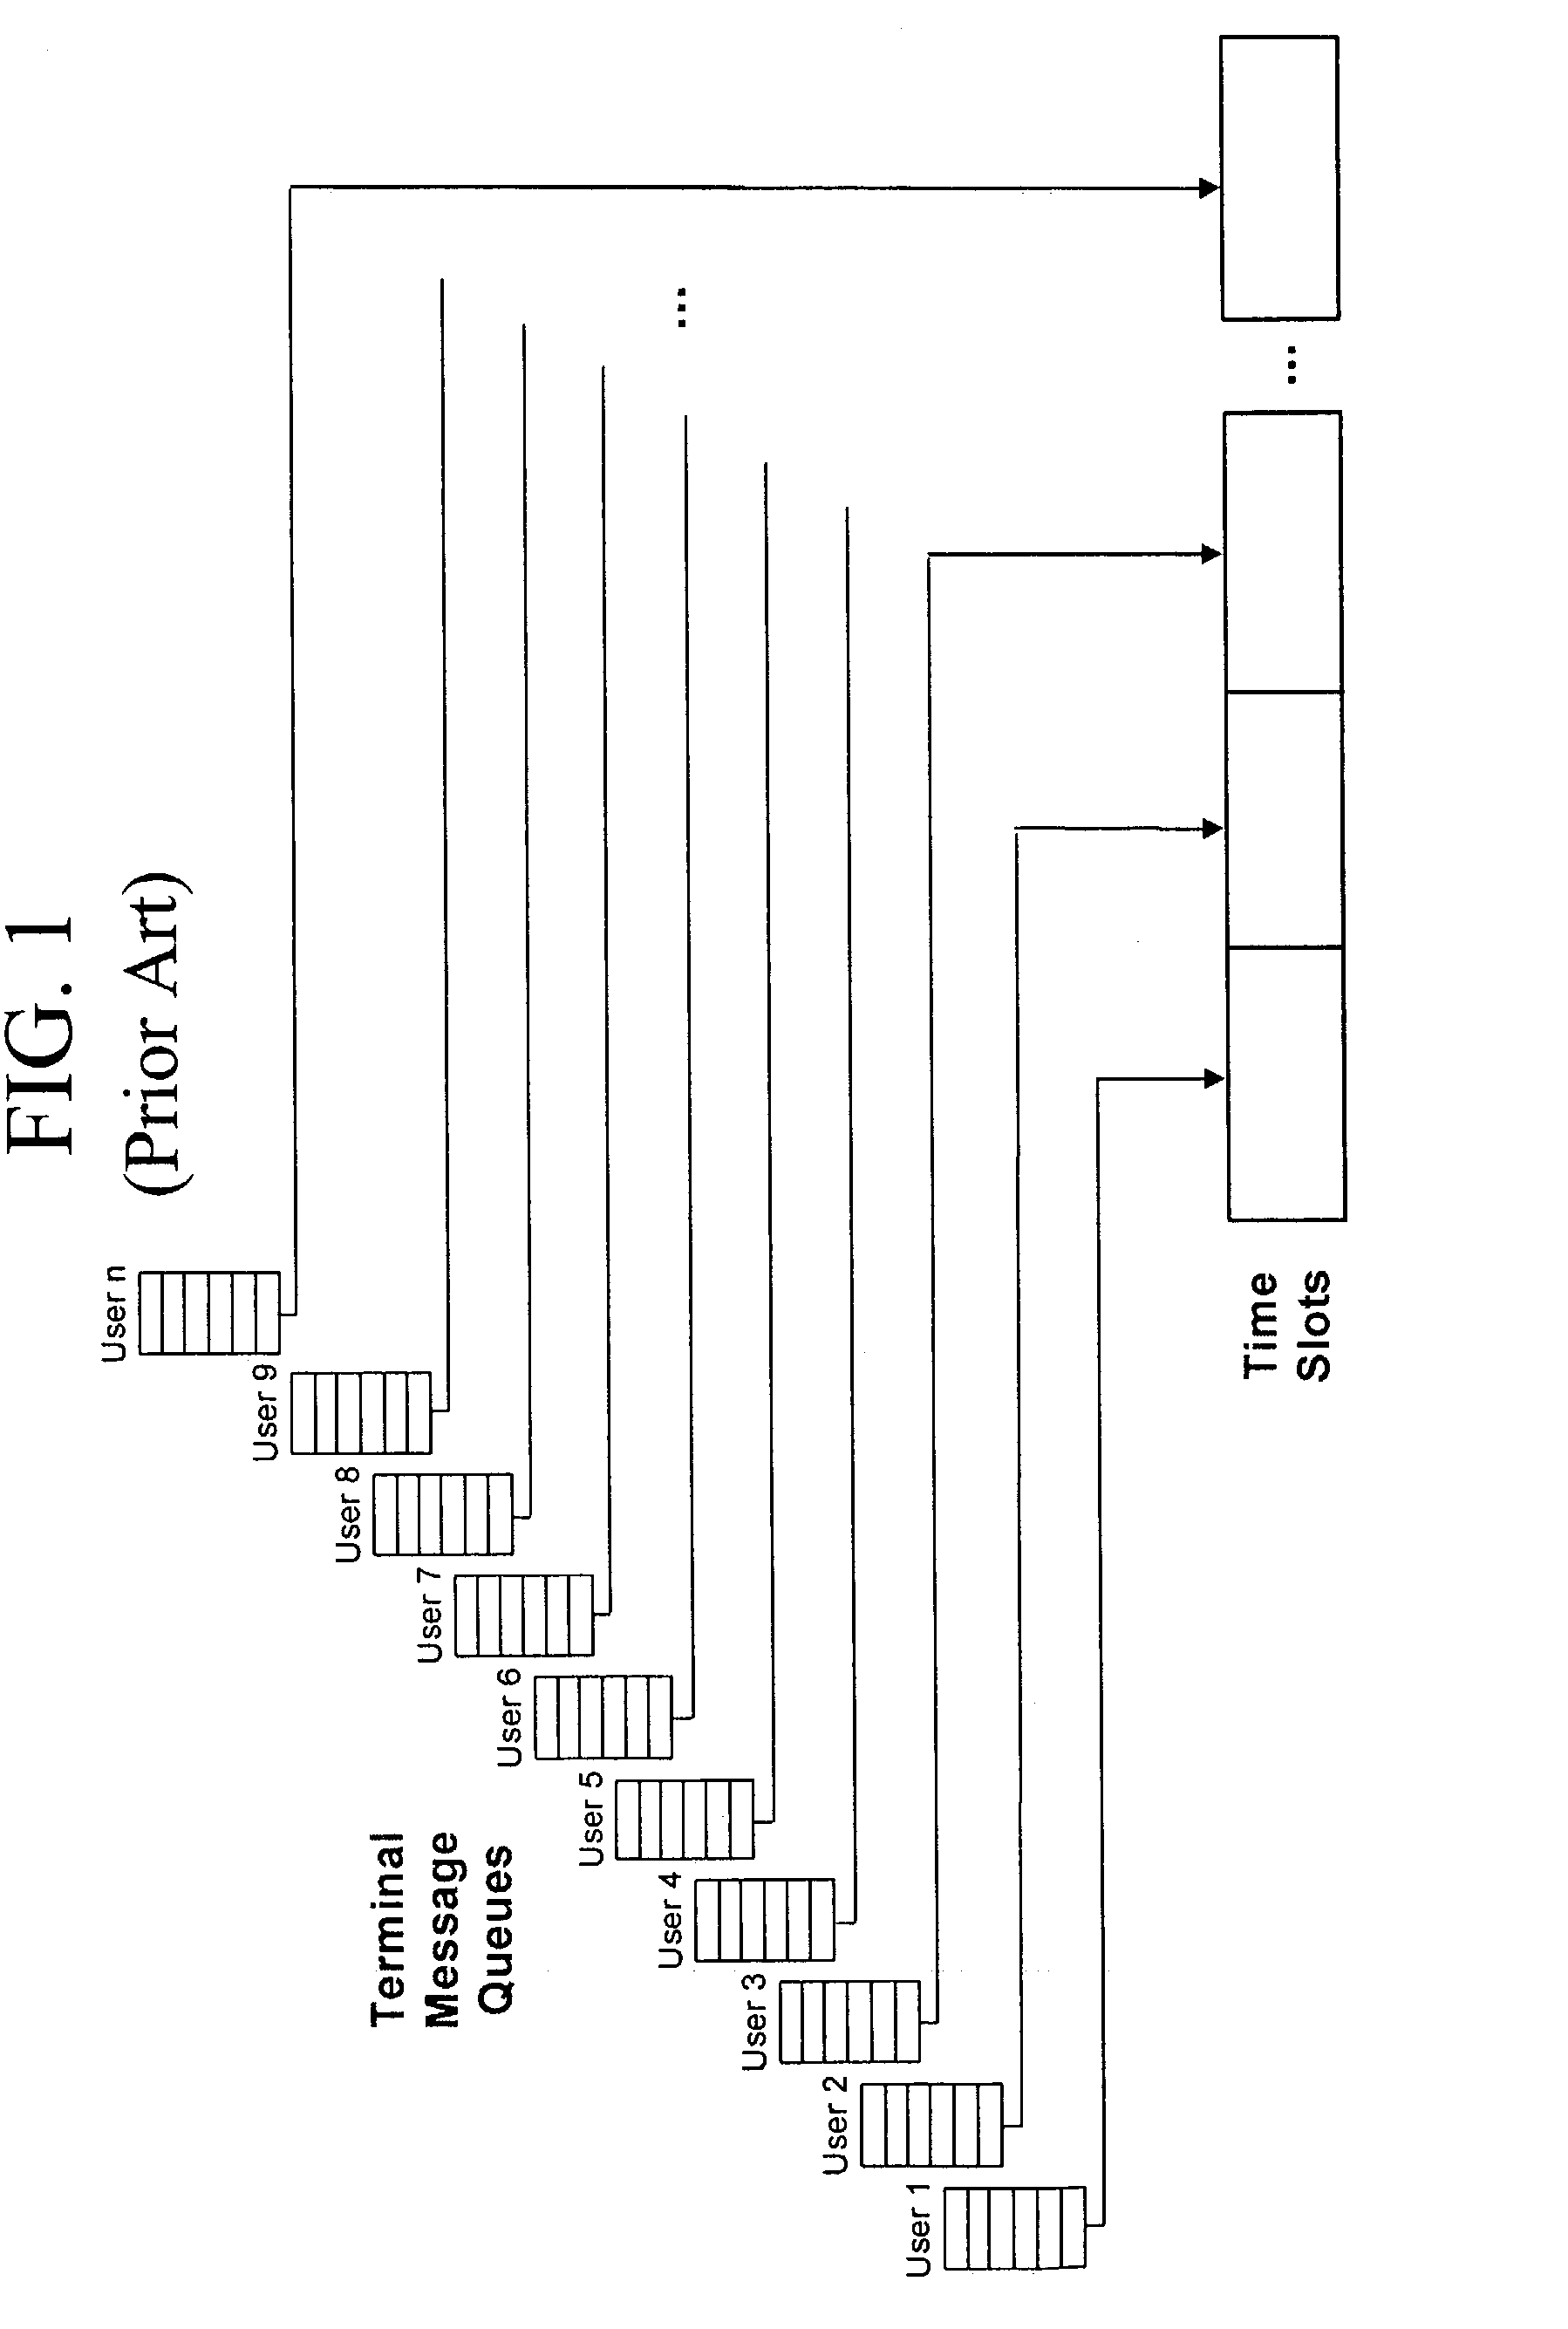 Stochastic unified multiple access to a communications channel